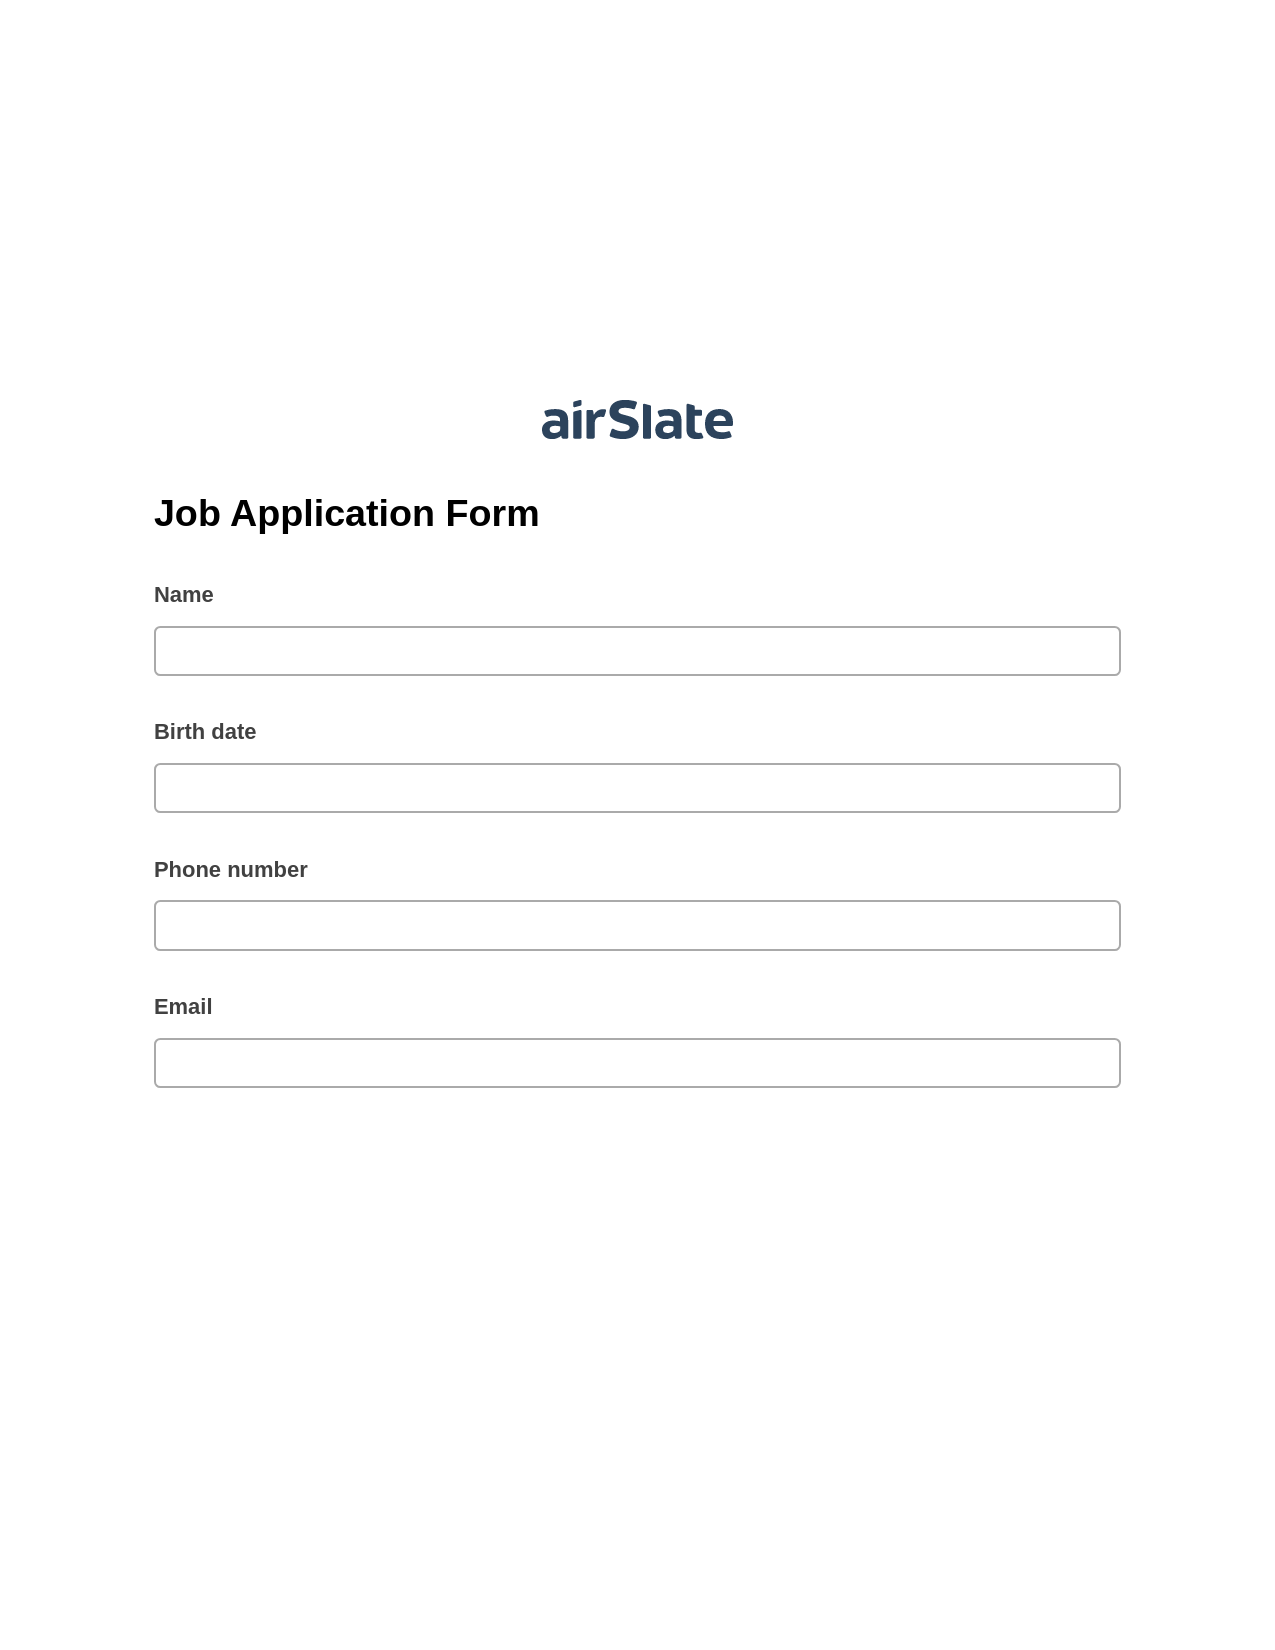 Job Application Form Pre-fill Dropdowns from Office 365 Excel Bot, Update NetSuite Records Bot, Export to NetSuite Record Bot